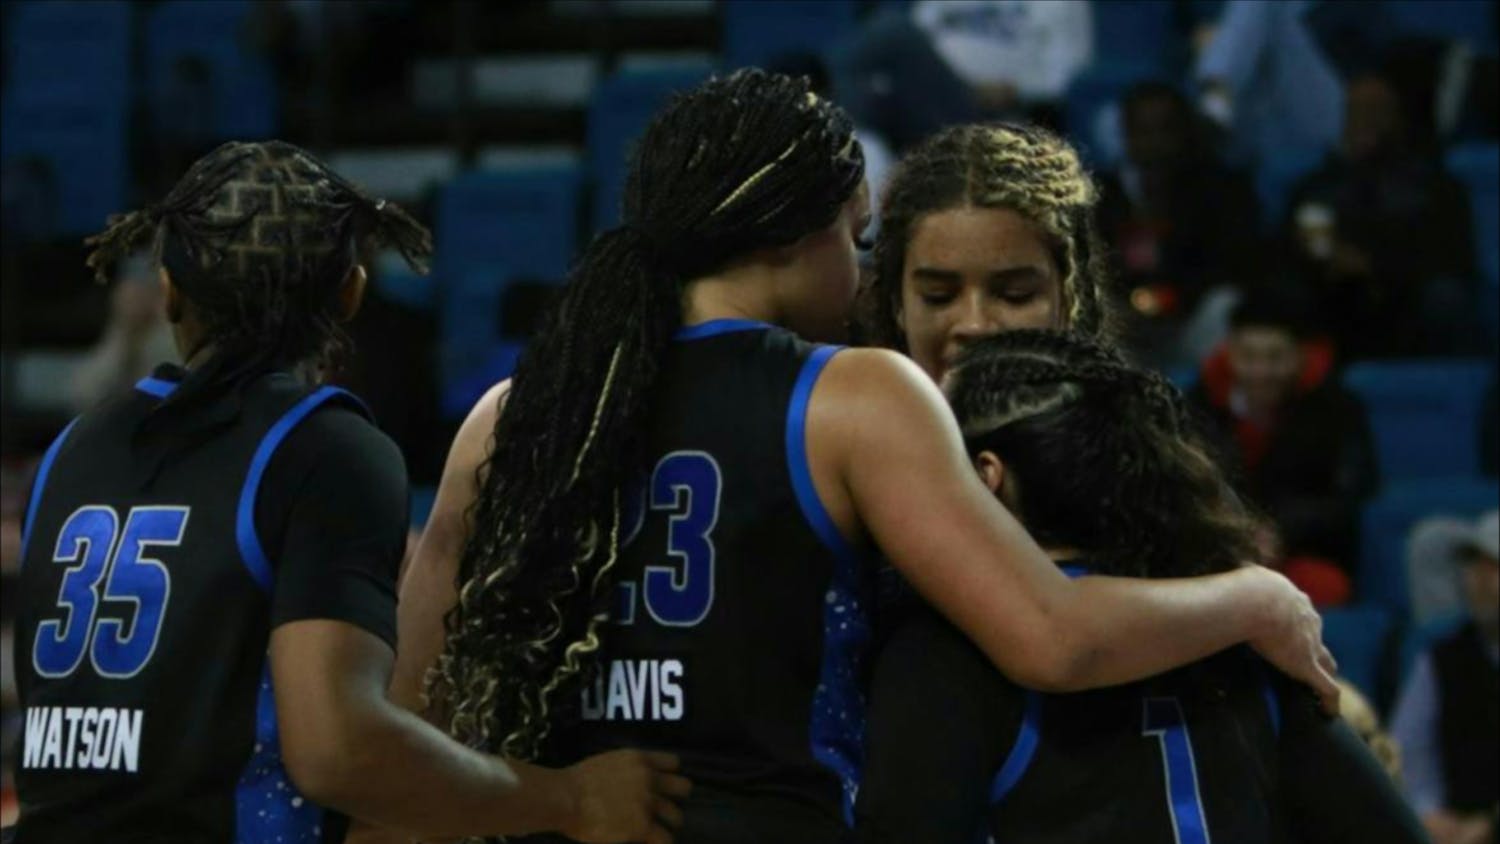 UB women's basketball advanced to the MAC championship game with a win on Friday.